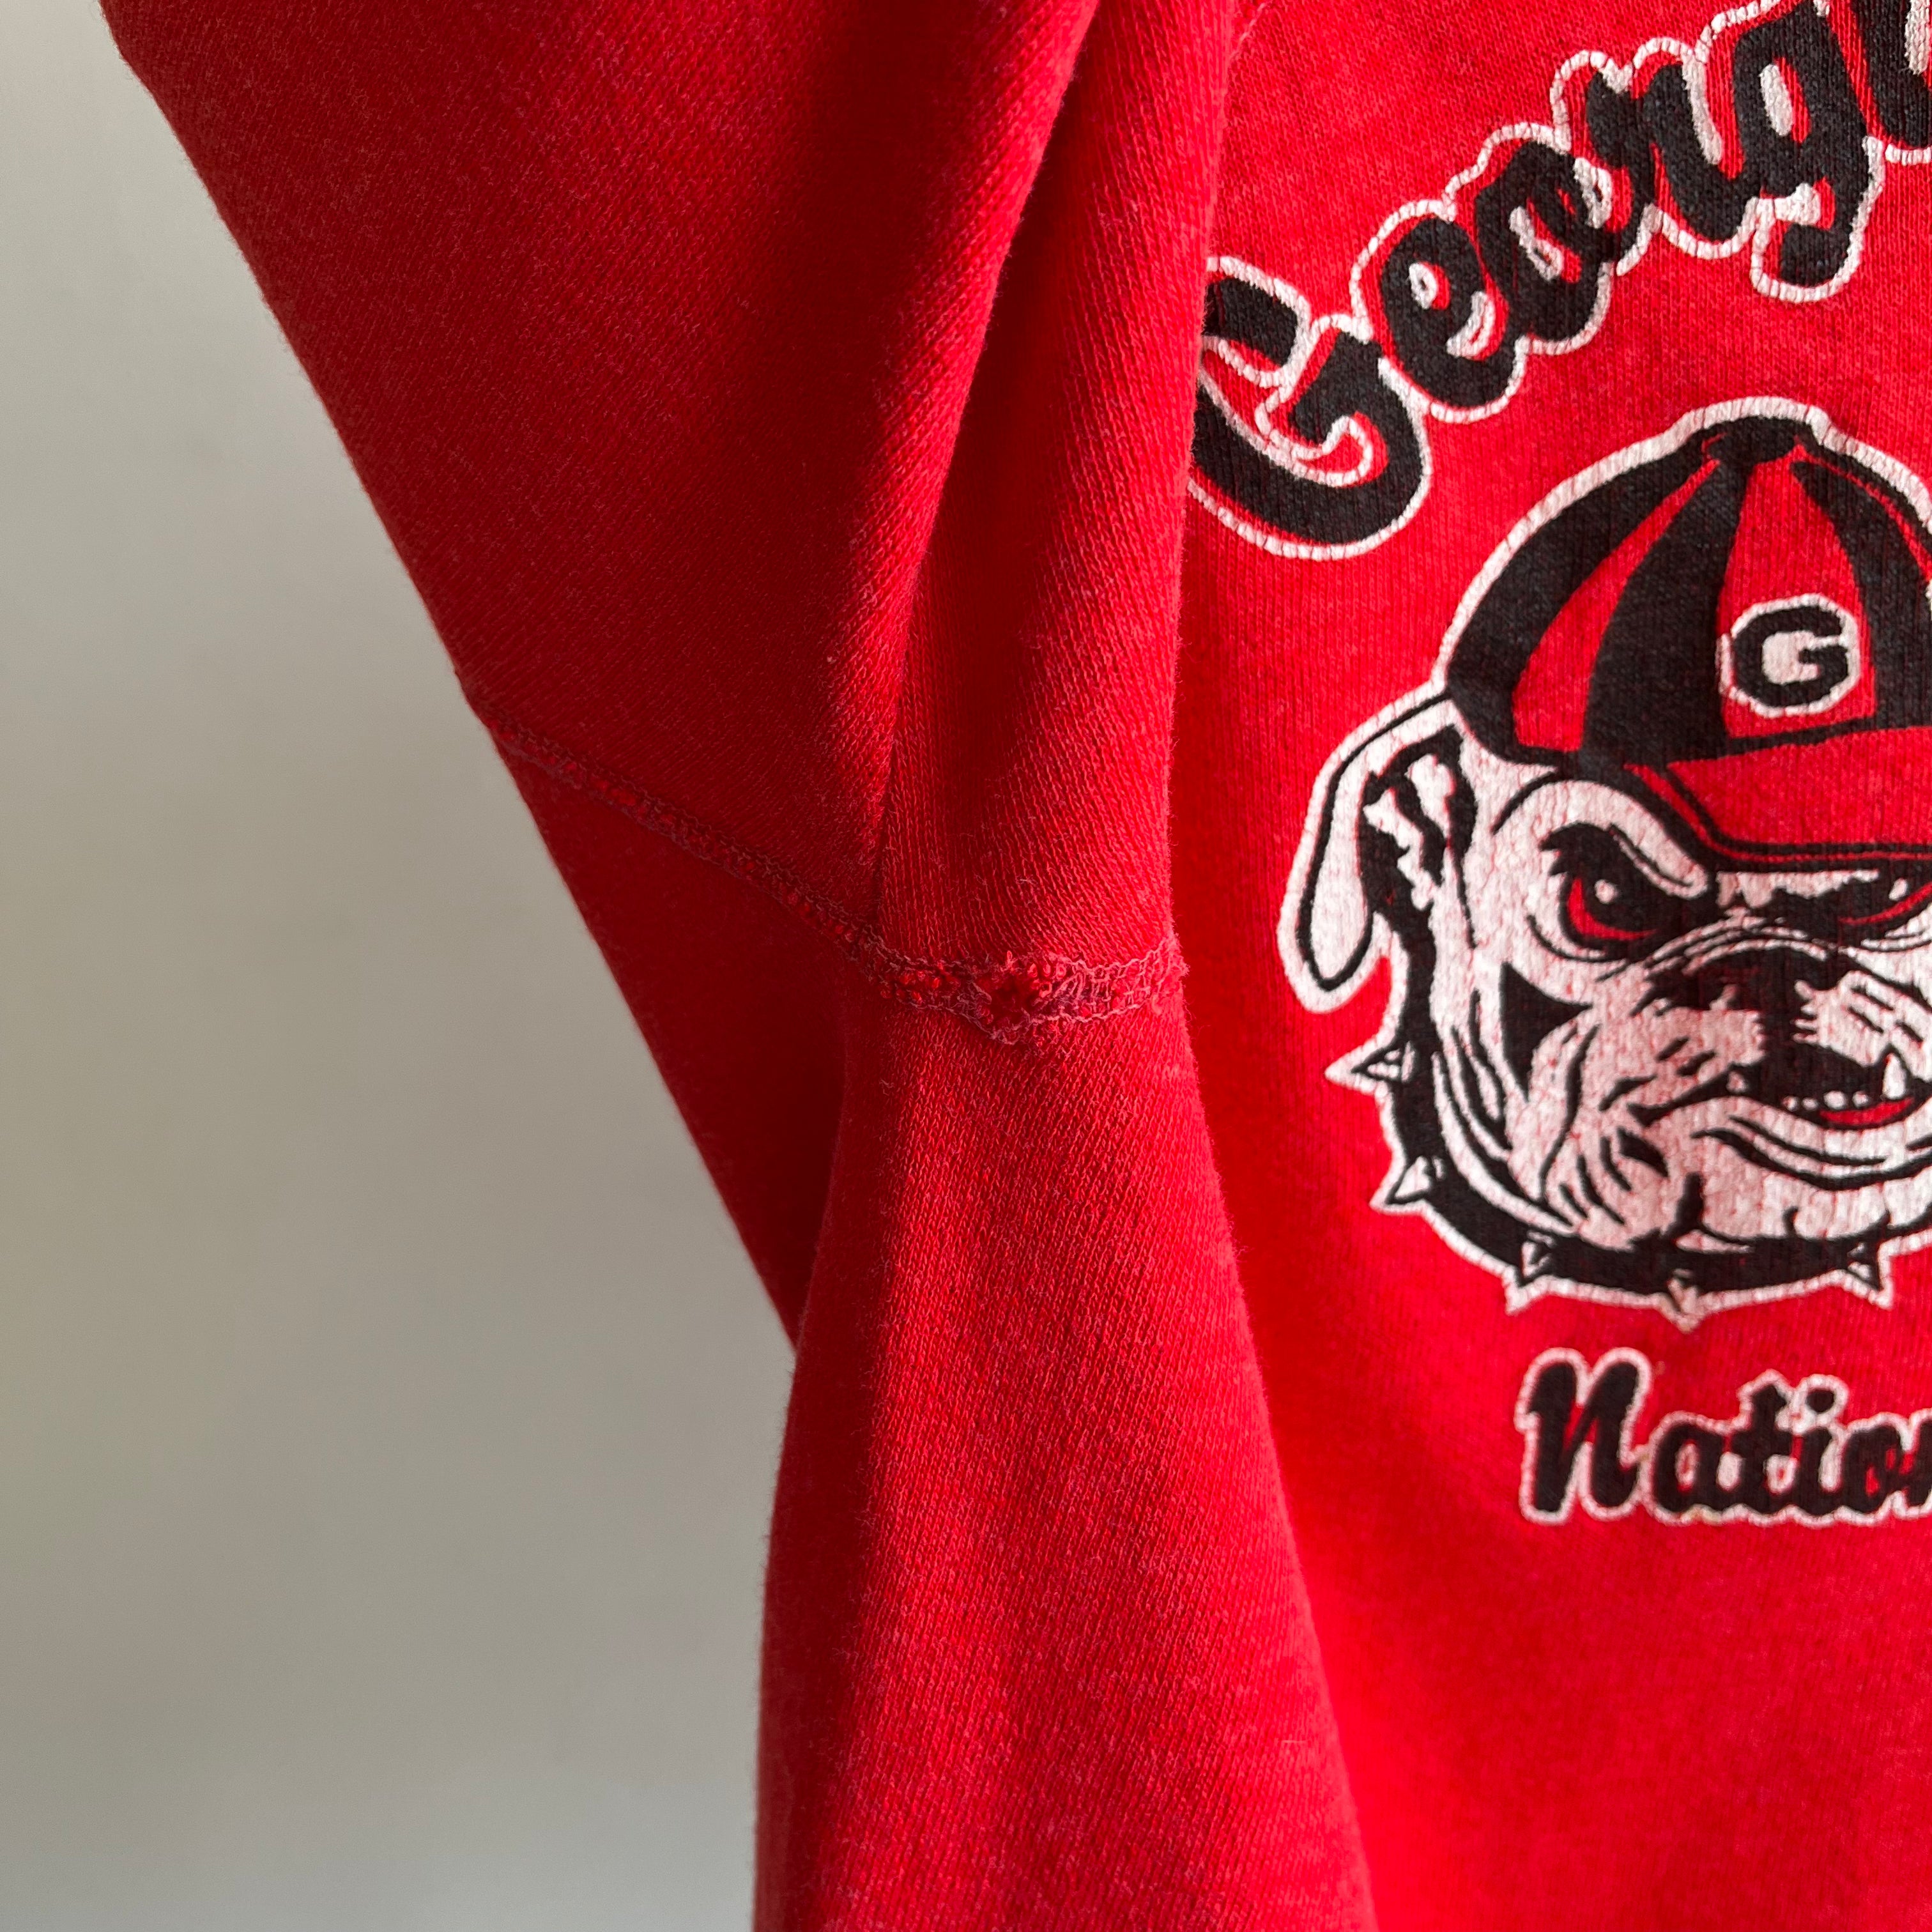 1970s Georgia Bulldog Champs Thinned Out and Worn Sweatshirt